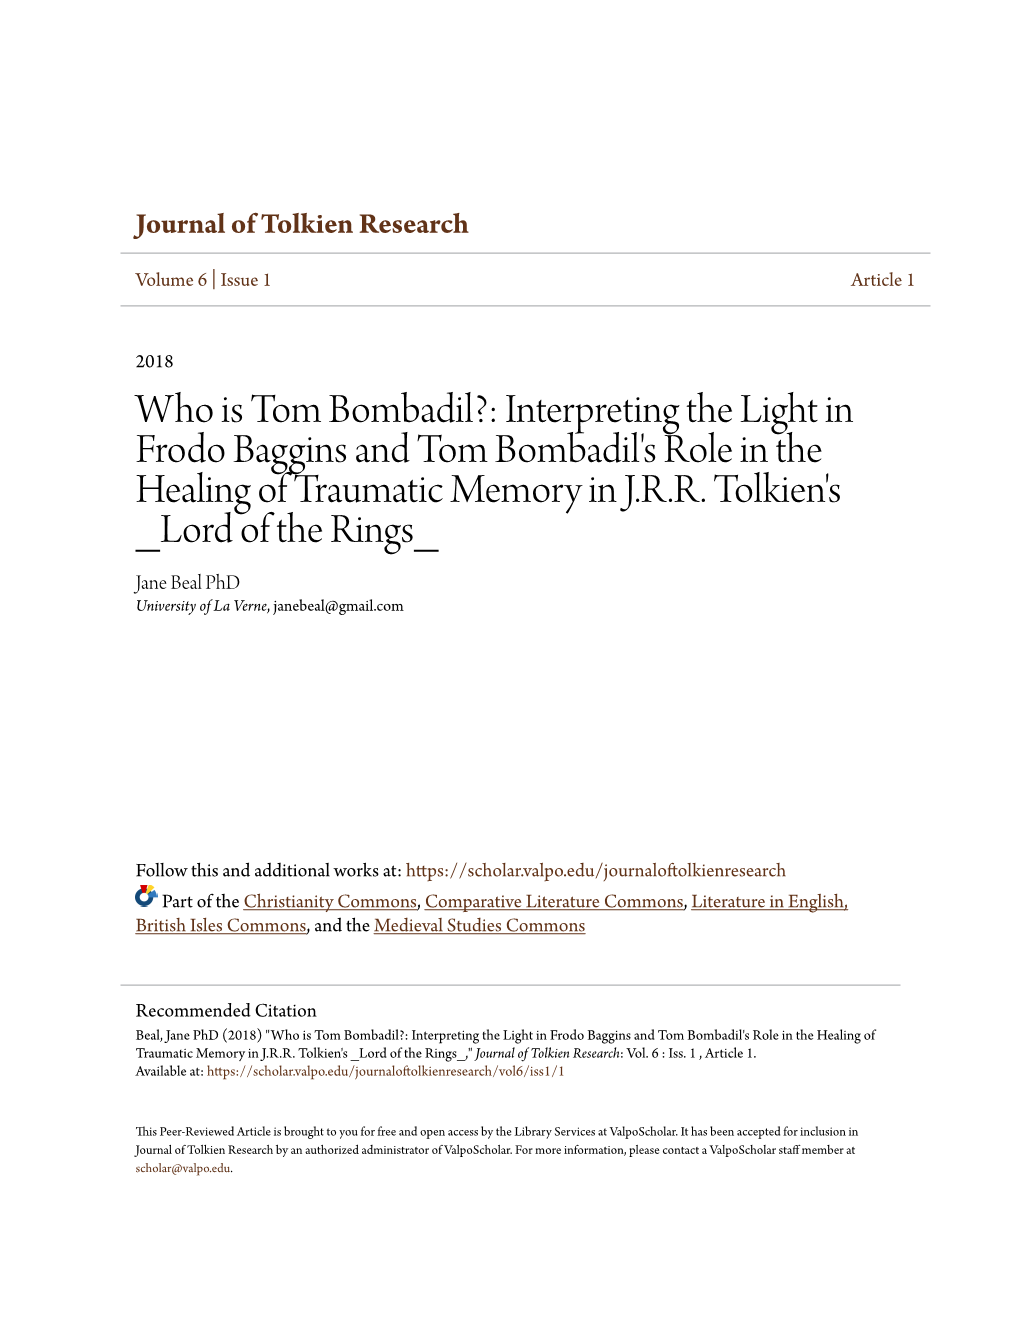 Who Is Tom Bombadil?: Interpreting the Light in Frodo Baggins and Tom Bombadil's Role in the Healing of Traumatic Memory in J.R.R